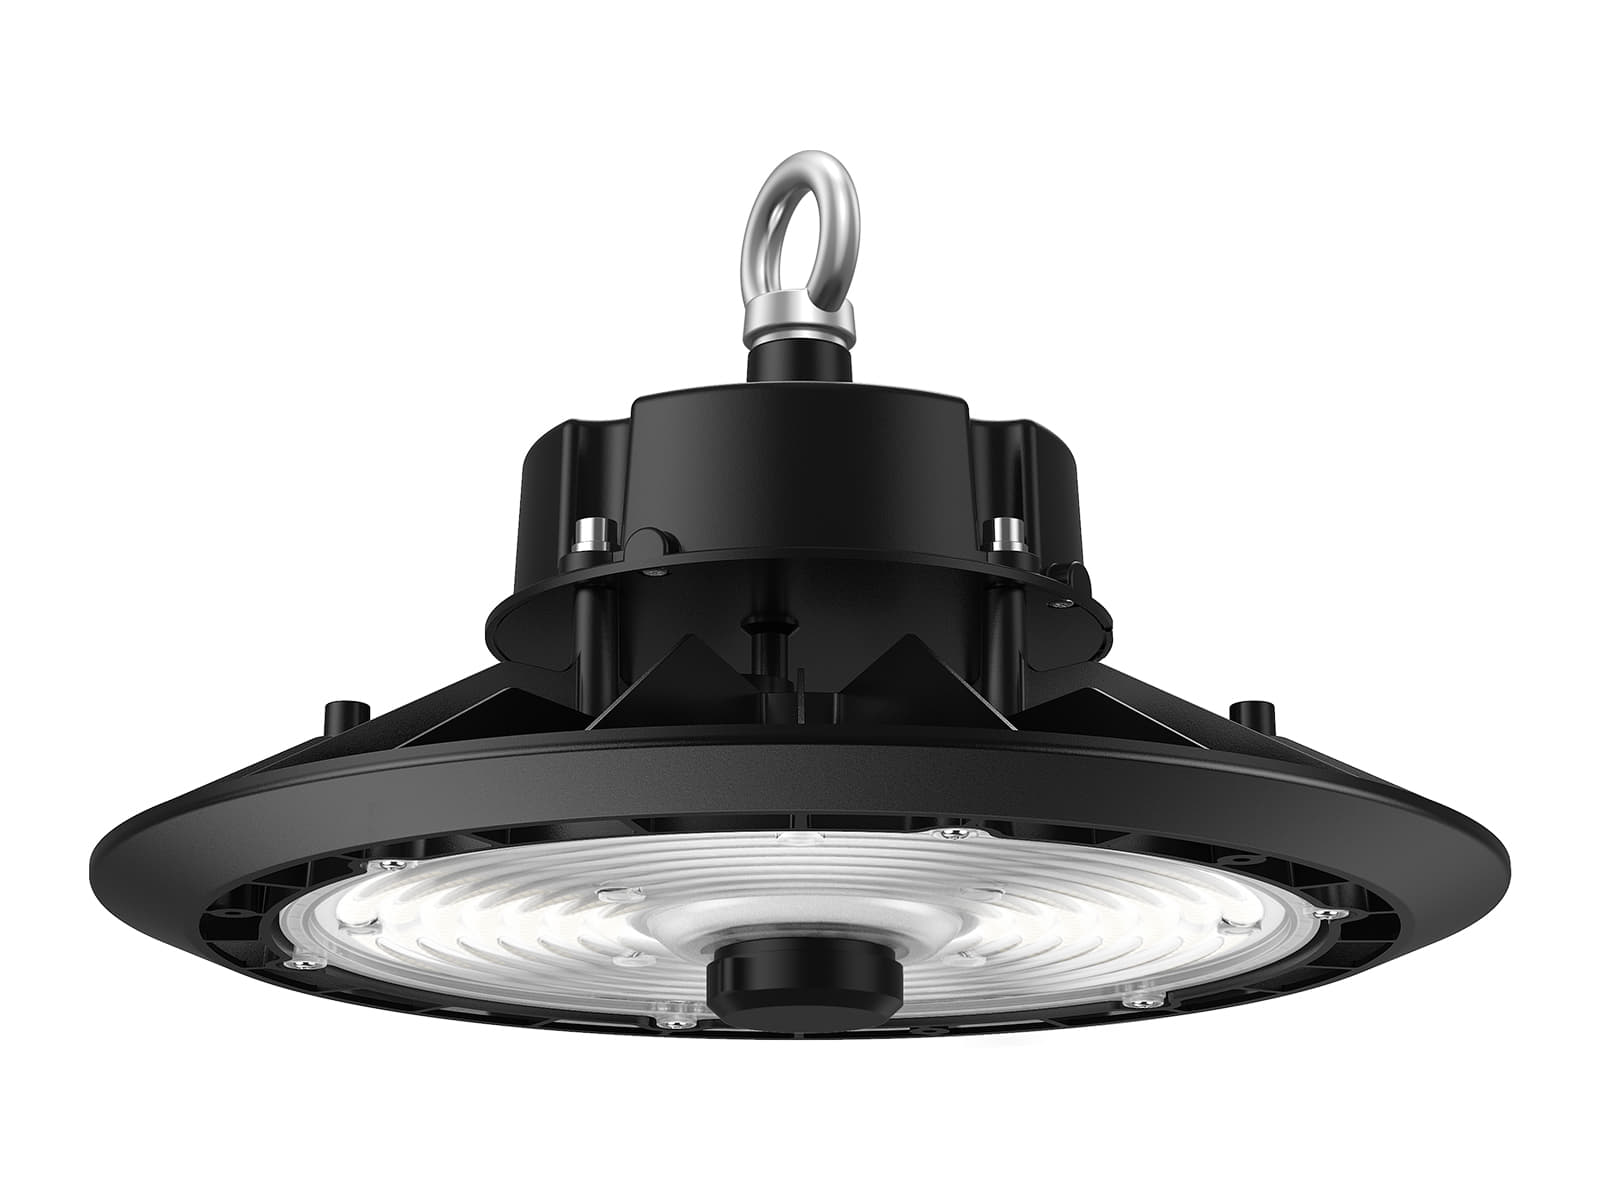 HB73 Economical and Power Selectable LED High Bay Light